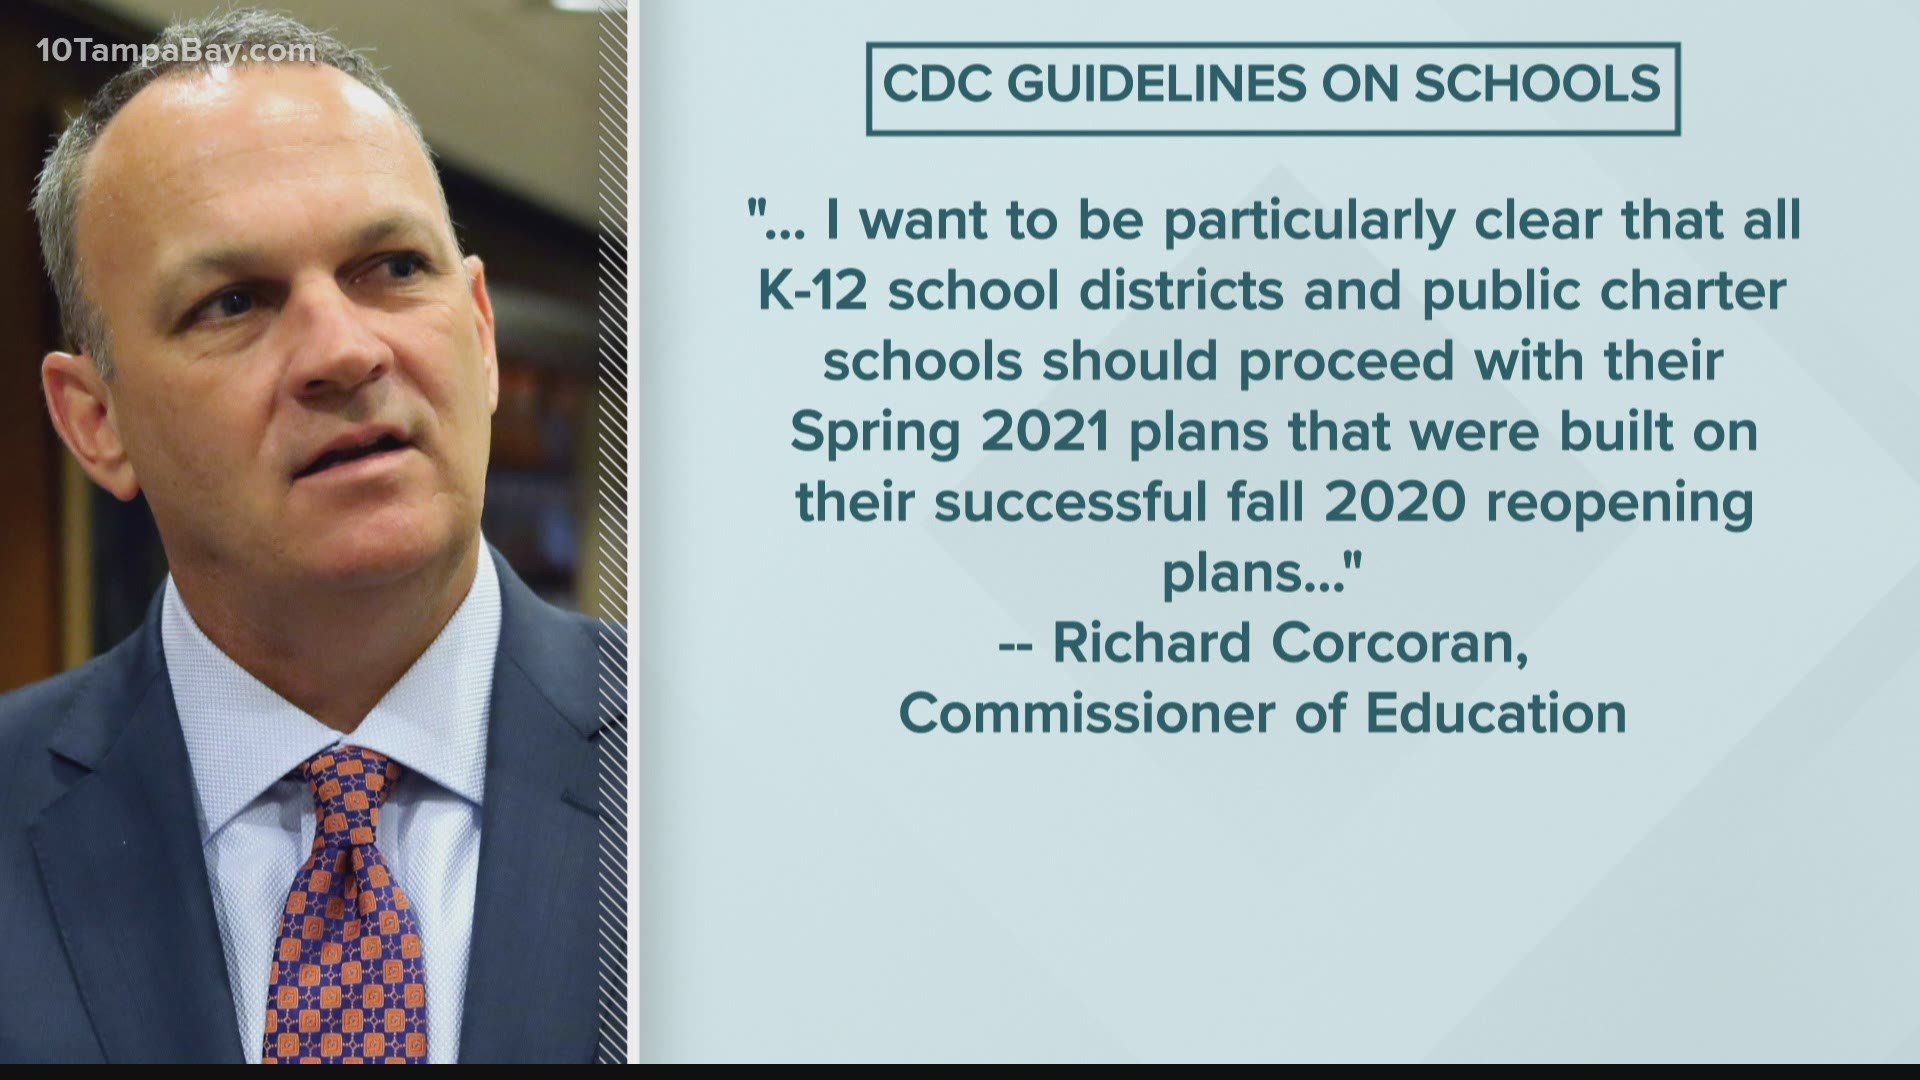 The 33-page roadmap emphasizes mask wearing and social distancing and says vaccination of teachers is important but not a prerequisite for reopening schools.